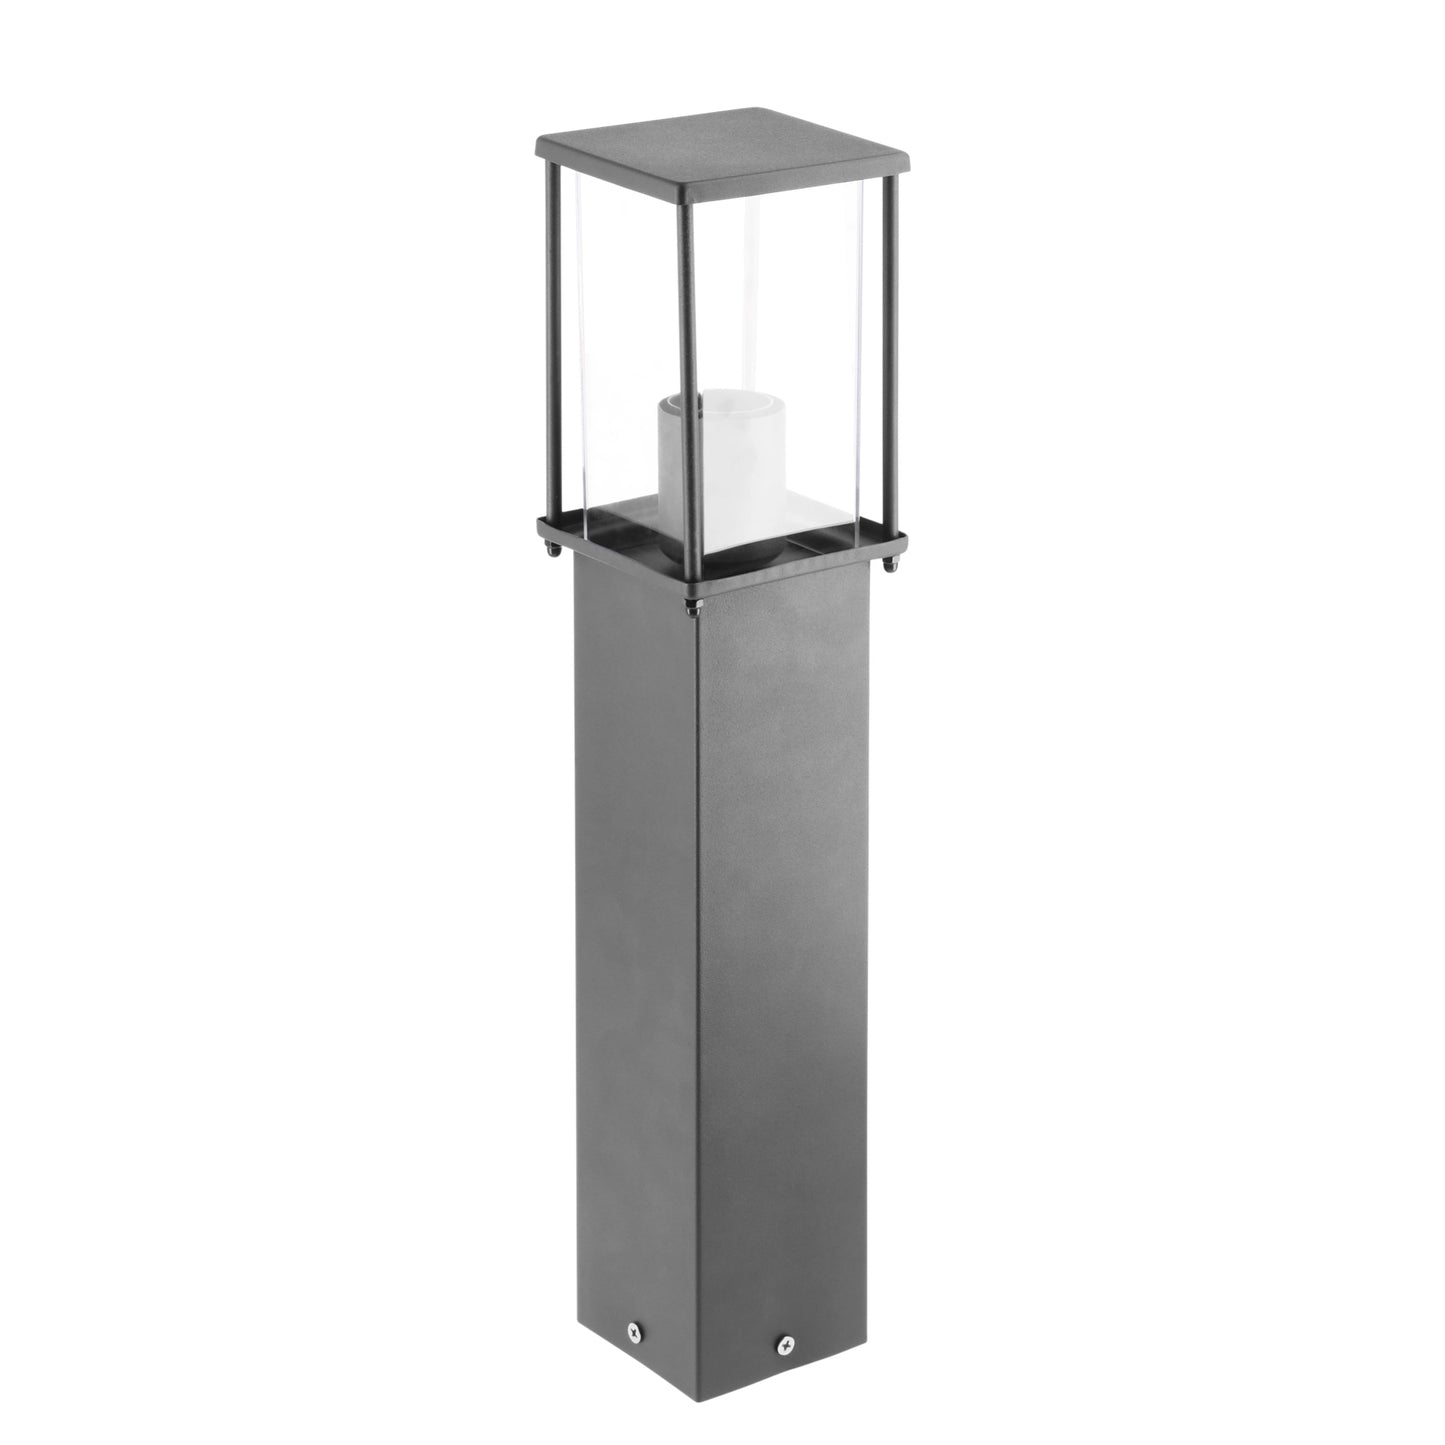 Our Kemi dark grey outdoor post light would look perfect in a modern or more traditional home design. Outside post lights can provide atmospheric light in your garden, at the front door or on the terrace as well as a great security solution. It is designed for durability and longevity with its robust material producing a fully weatherproof and water resistant light.